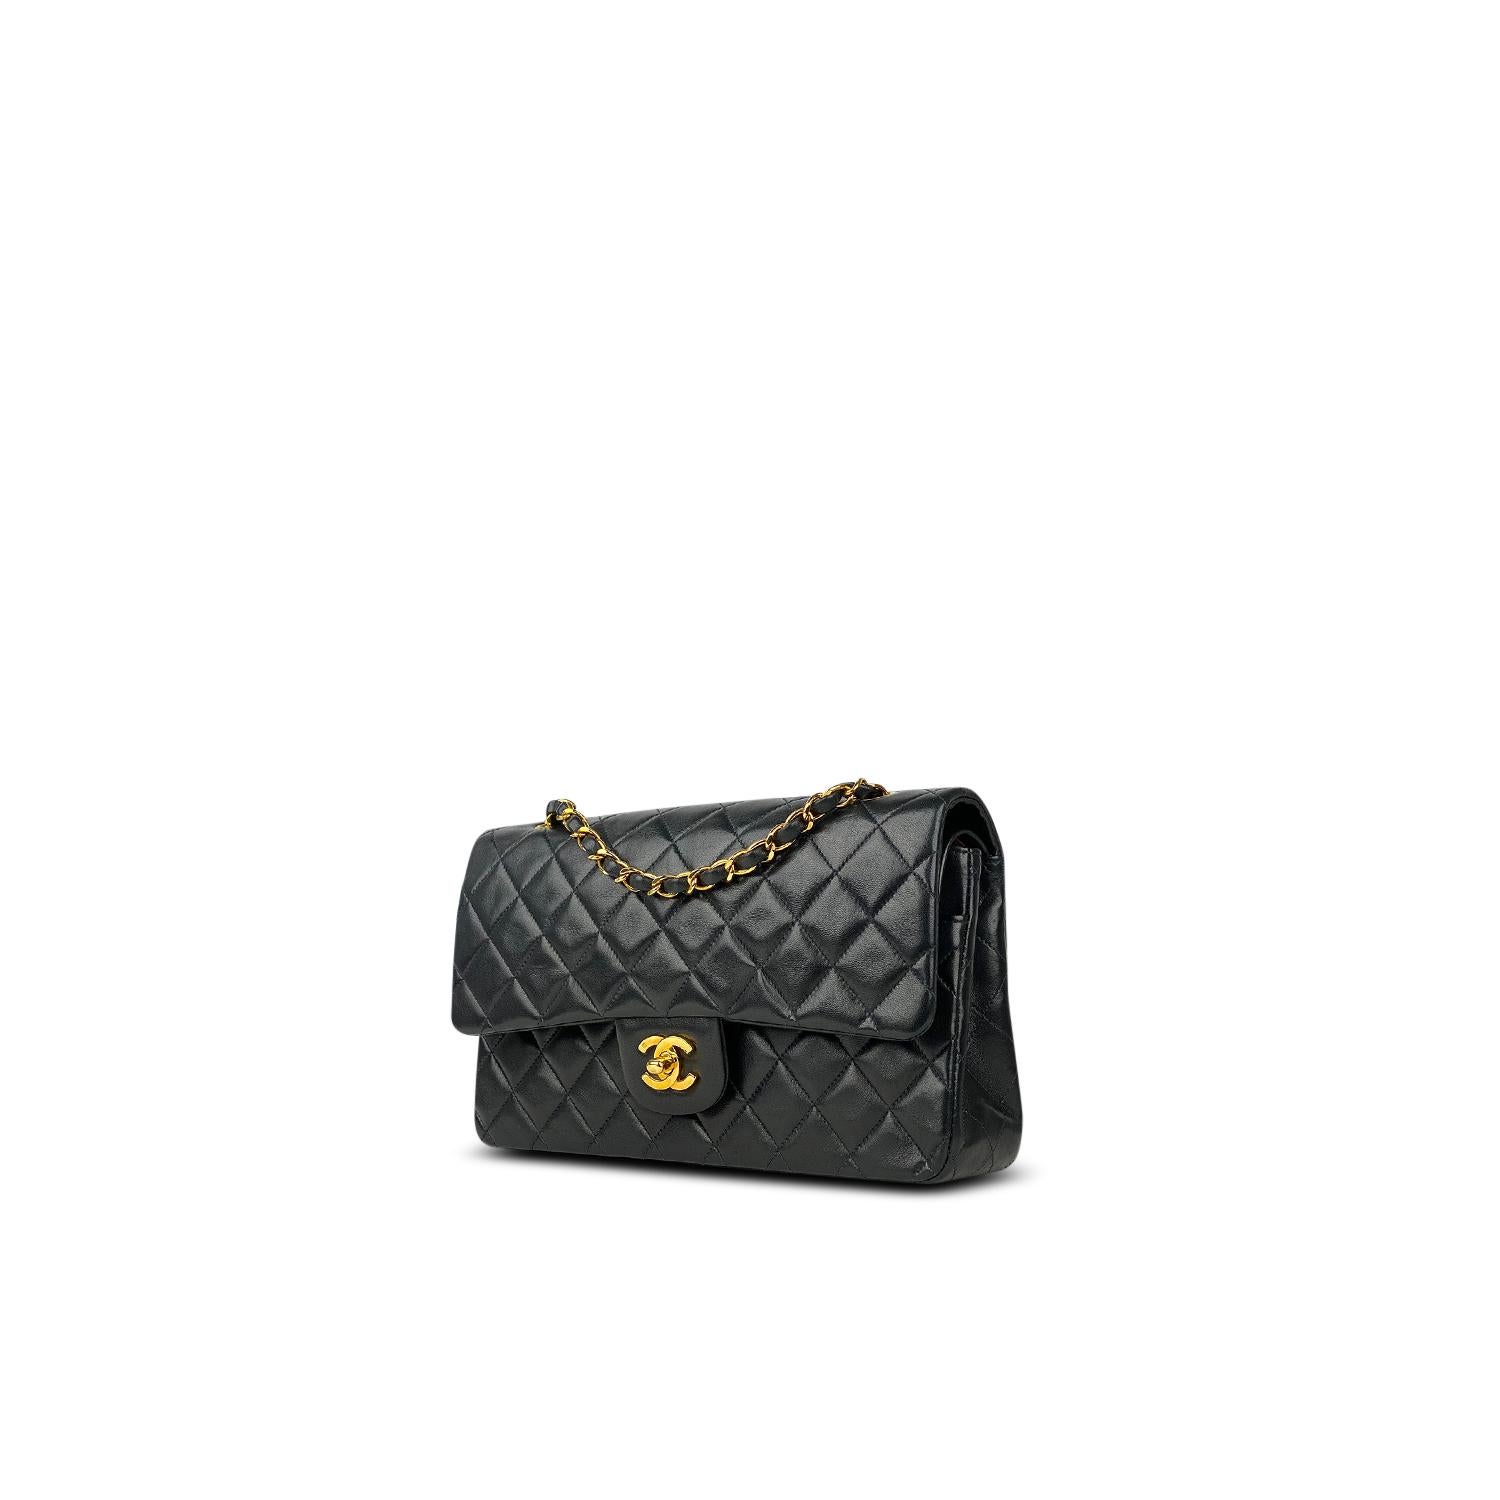 Black quilted lambskin Chanel Medium Classic/Timeless Double Flap bag with

– Gold-tone hardware
– Convertible chain-link and leather shoulder strap
– Burgundy leather lining
– Single patch pocket at back
– Single zip pocket at flap underside, three